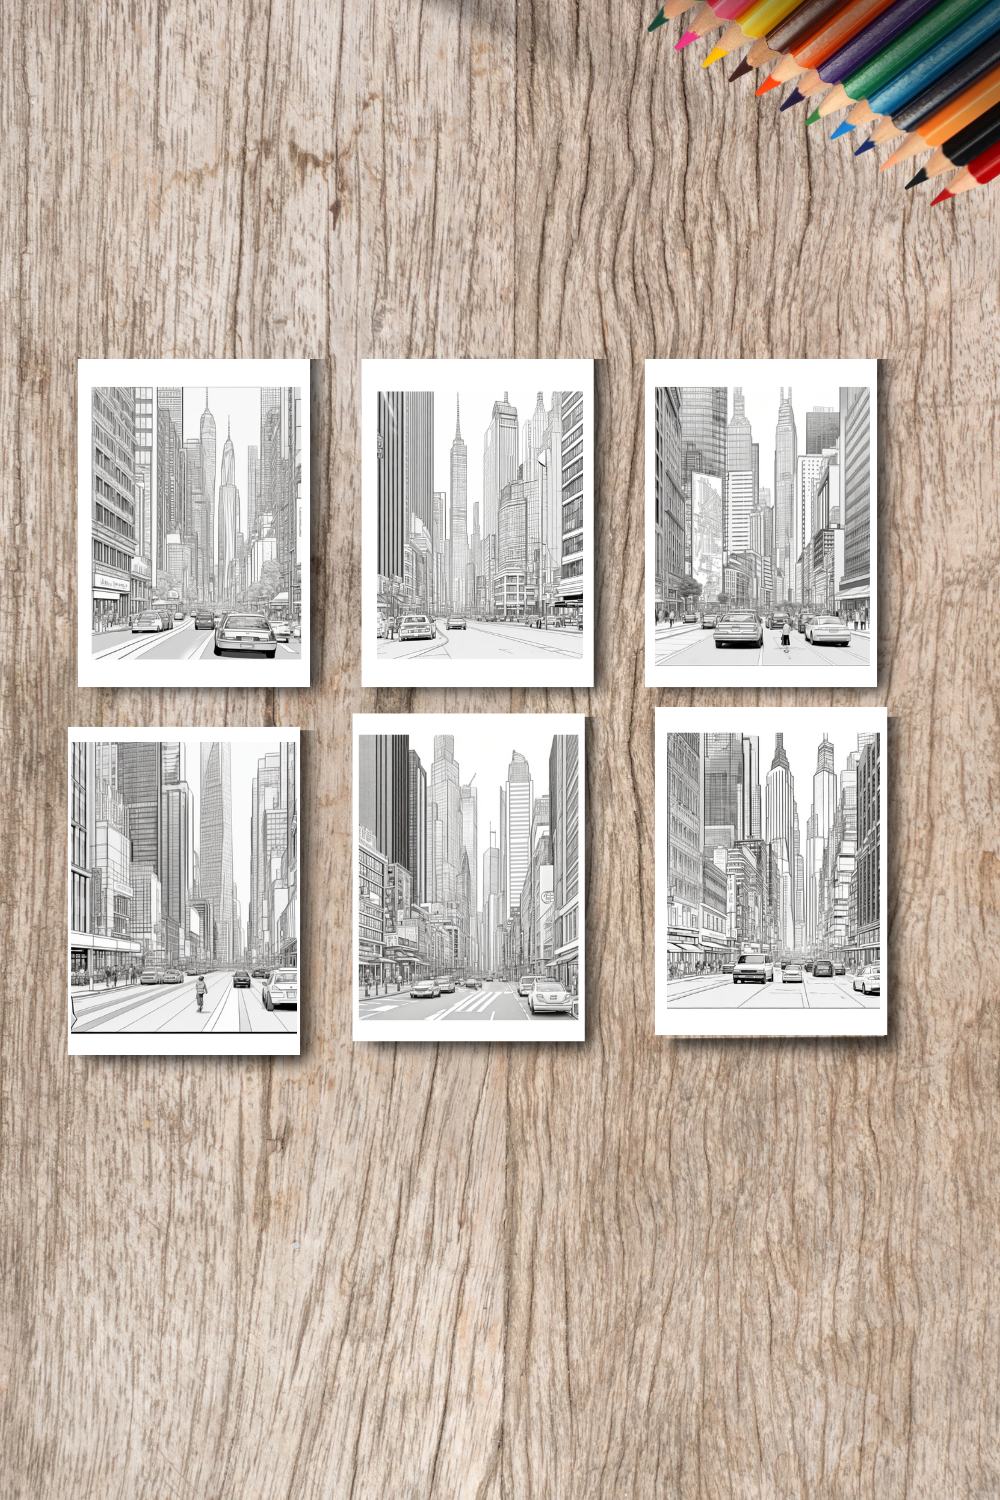 A cityscape with skyscrapers and a busy street scene coloring page 4 pinterest preview image.